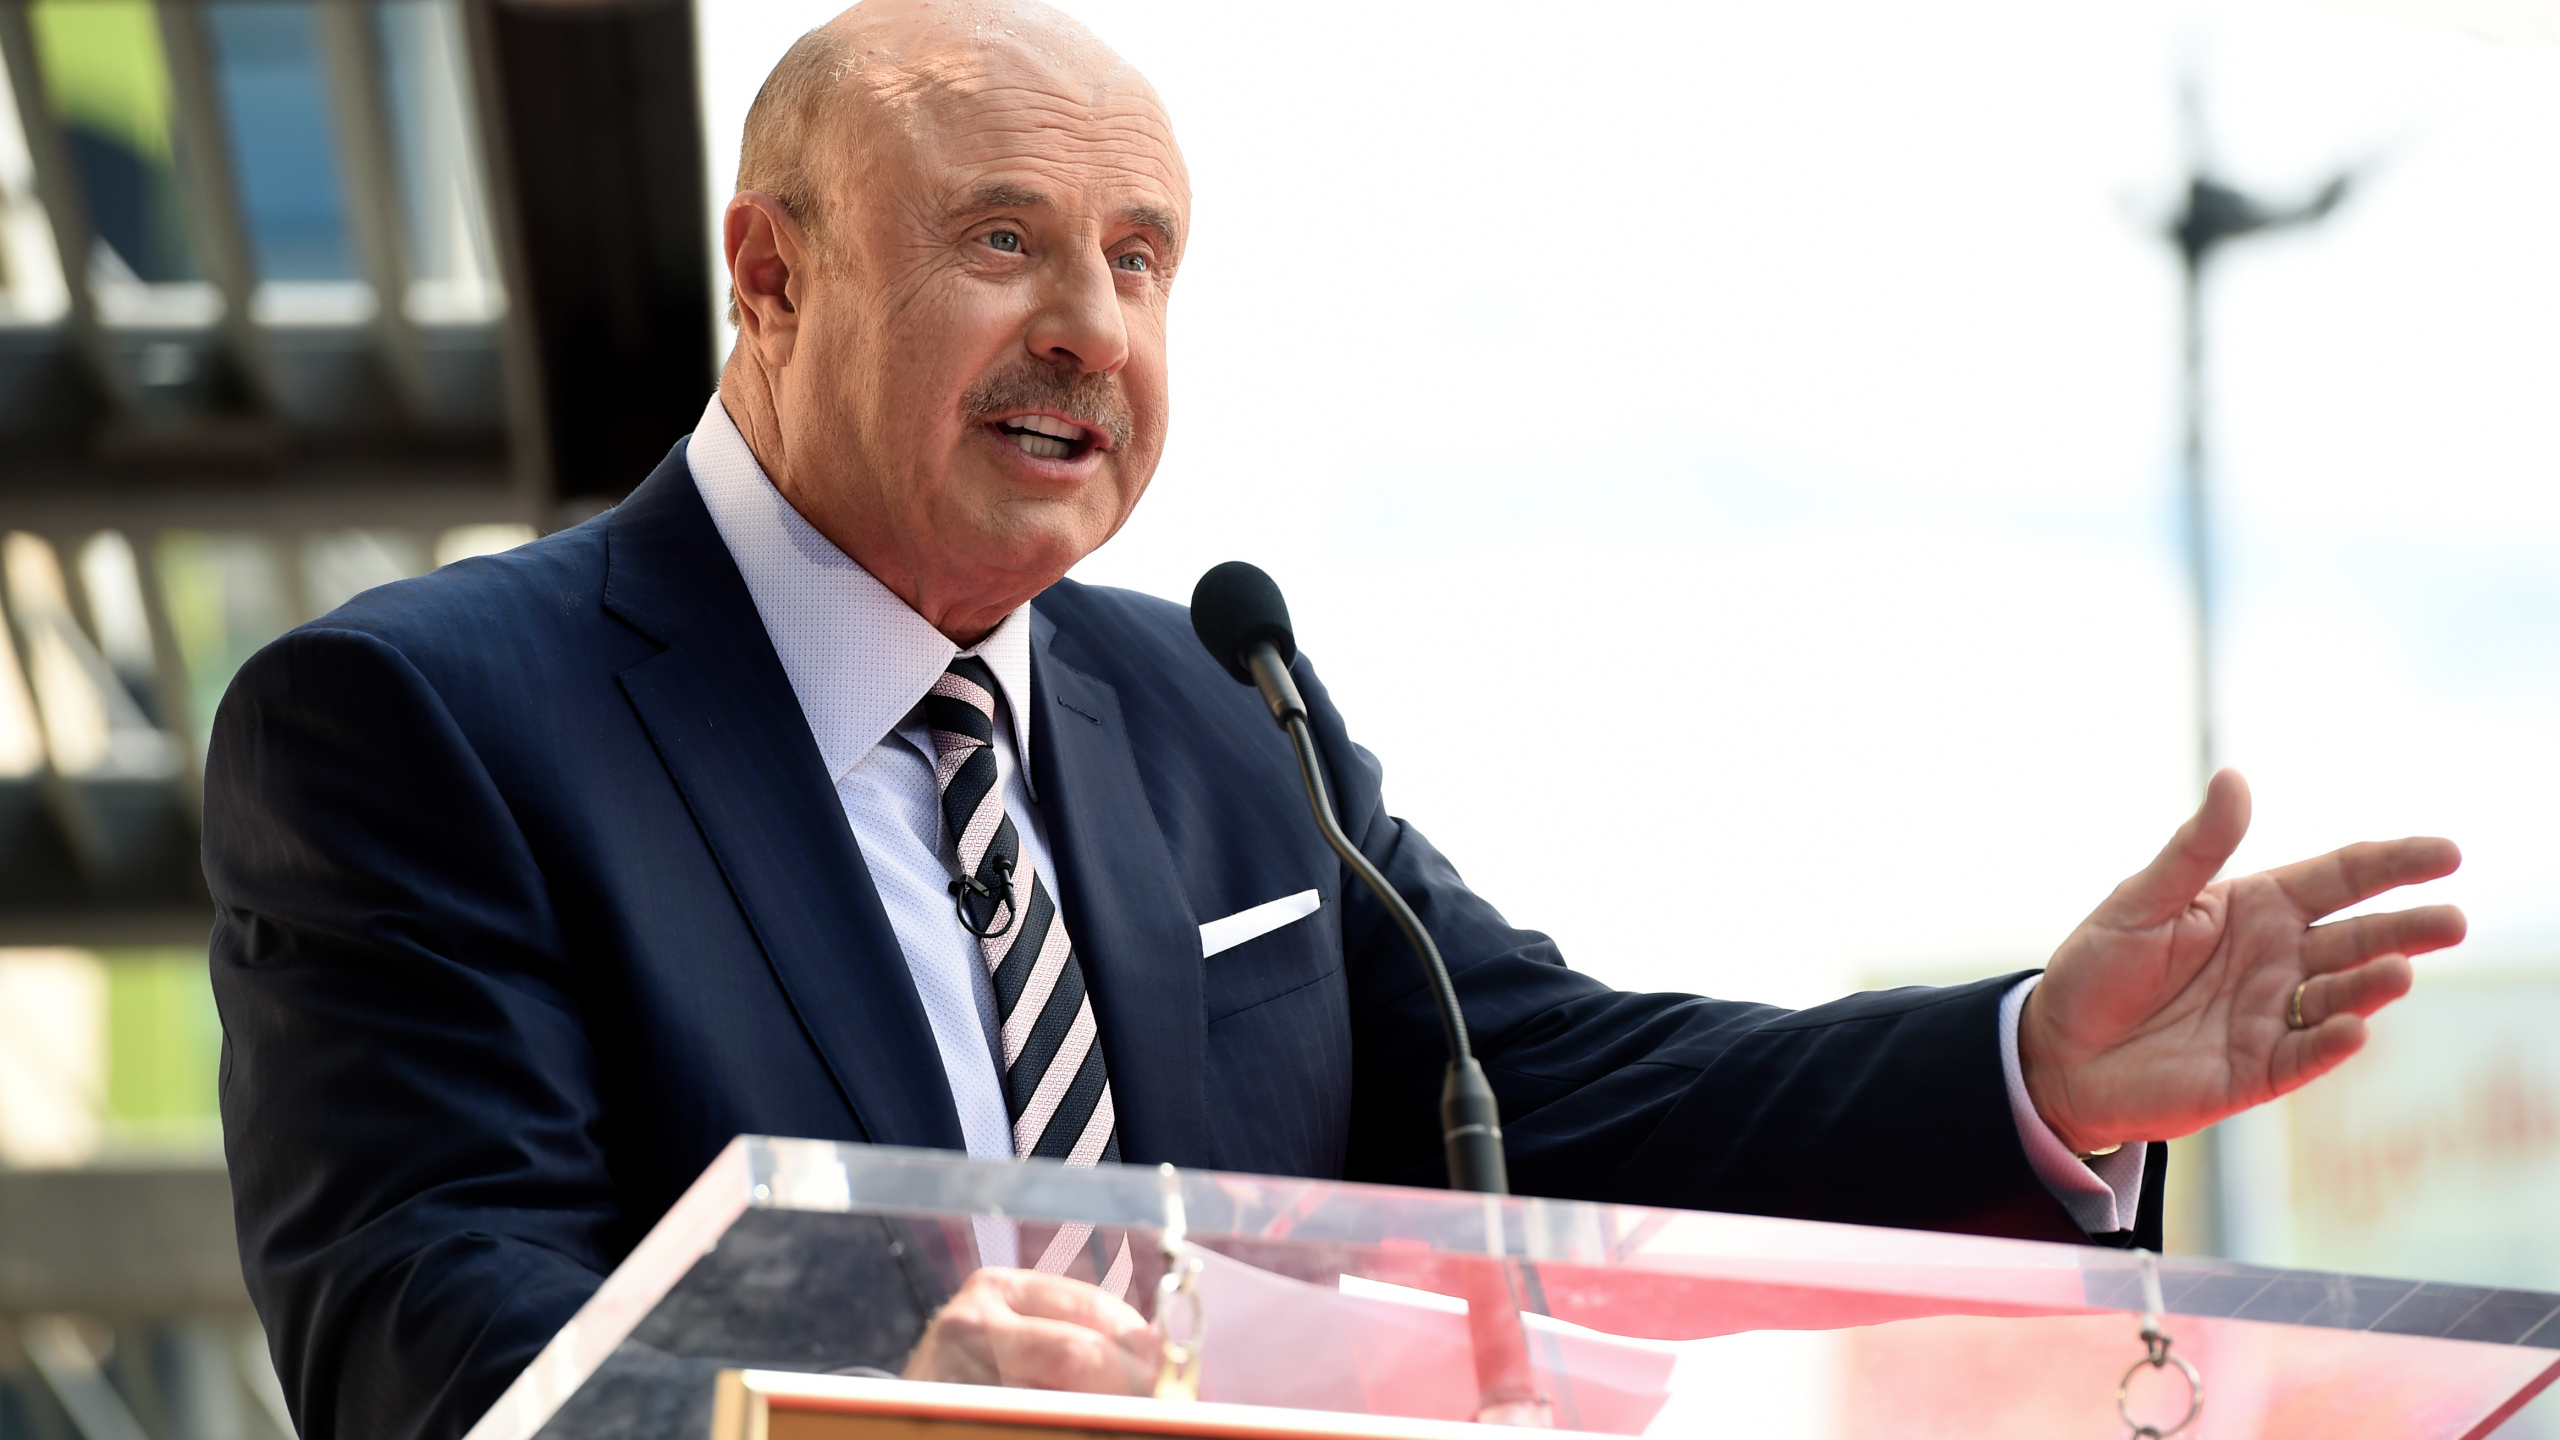 Dr. Phil's Production Company Received $7M in PPP Loans